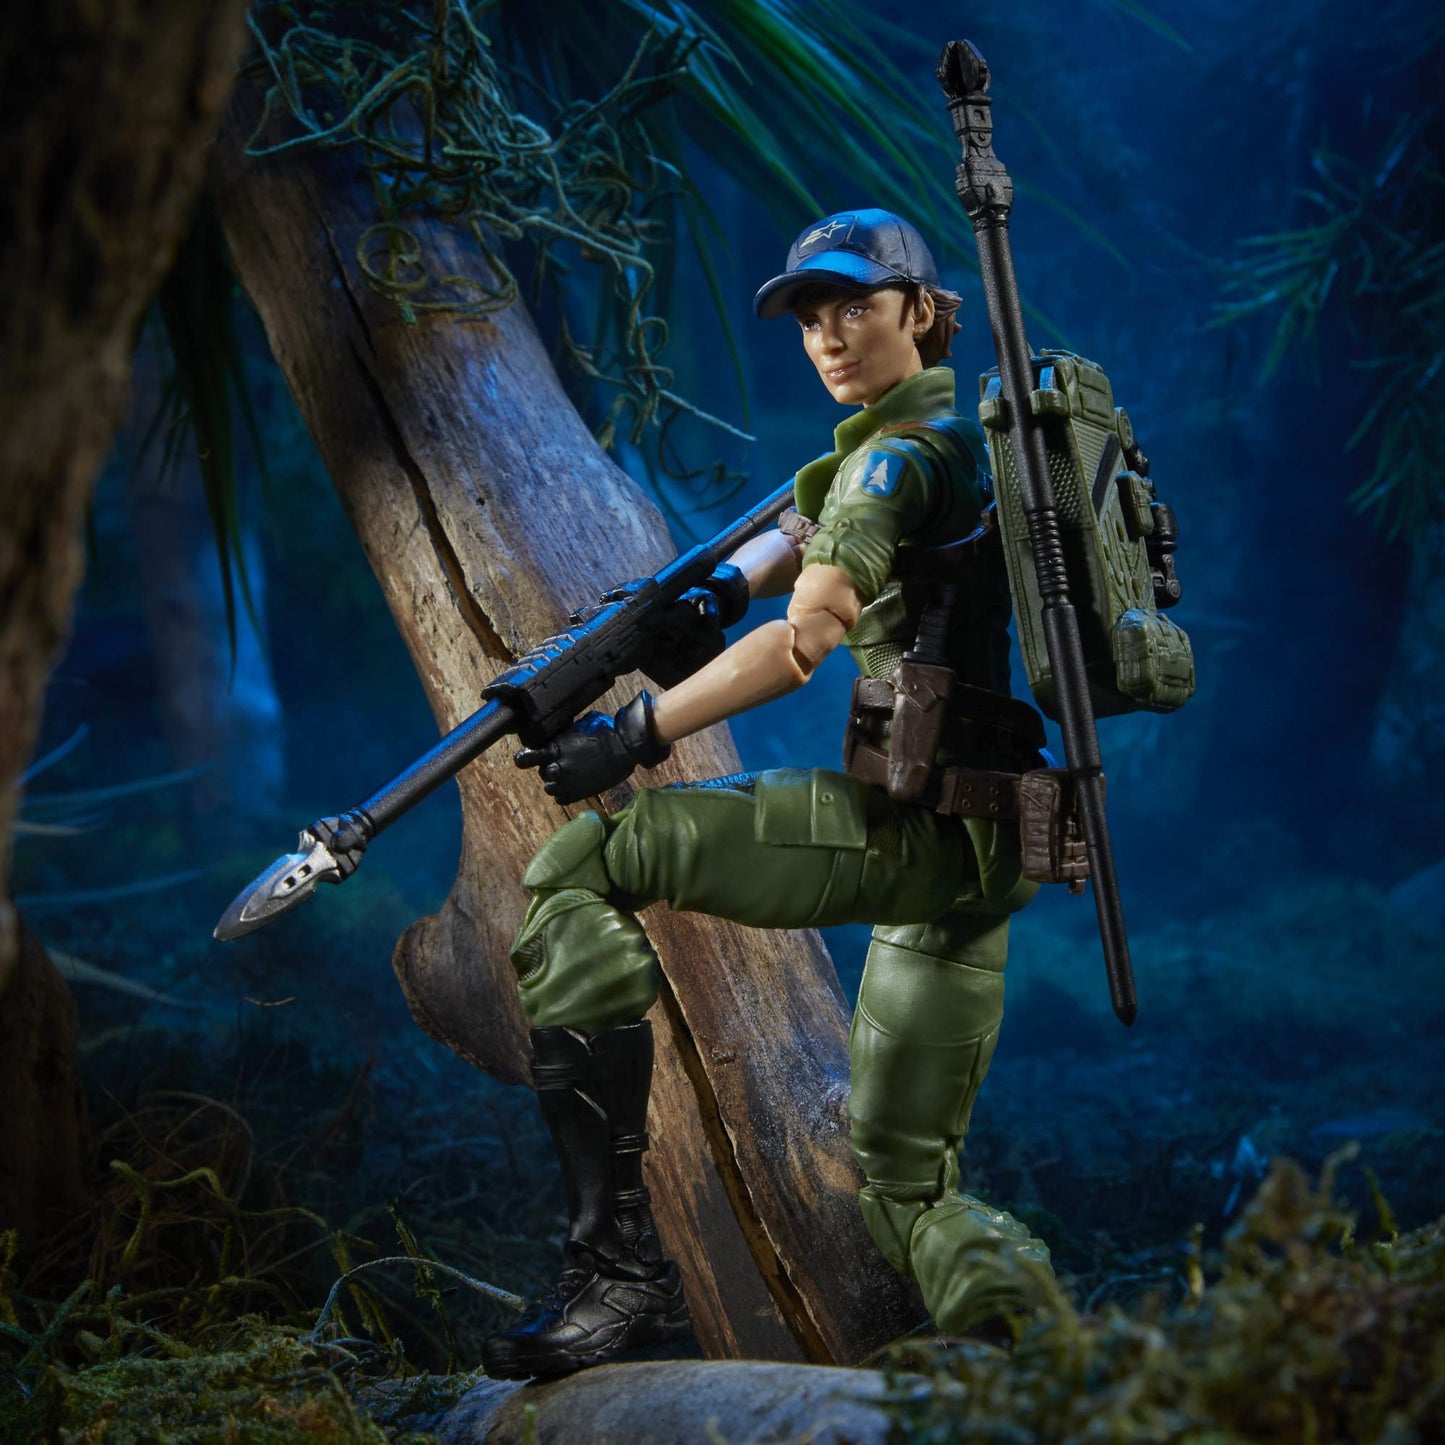 G.I. Joe Classified Series Lady Jaye Action Figure 25 Collectible Premium Toy with Multiple Accessories 6-Inch Scale with Custom Package Art